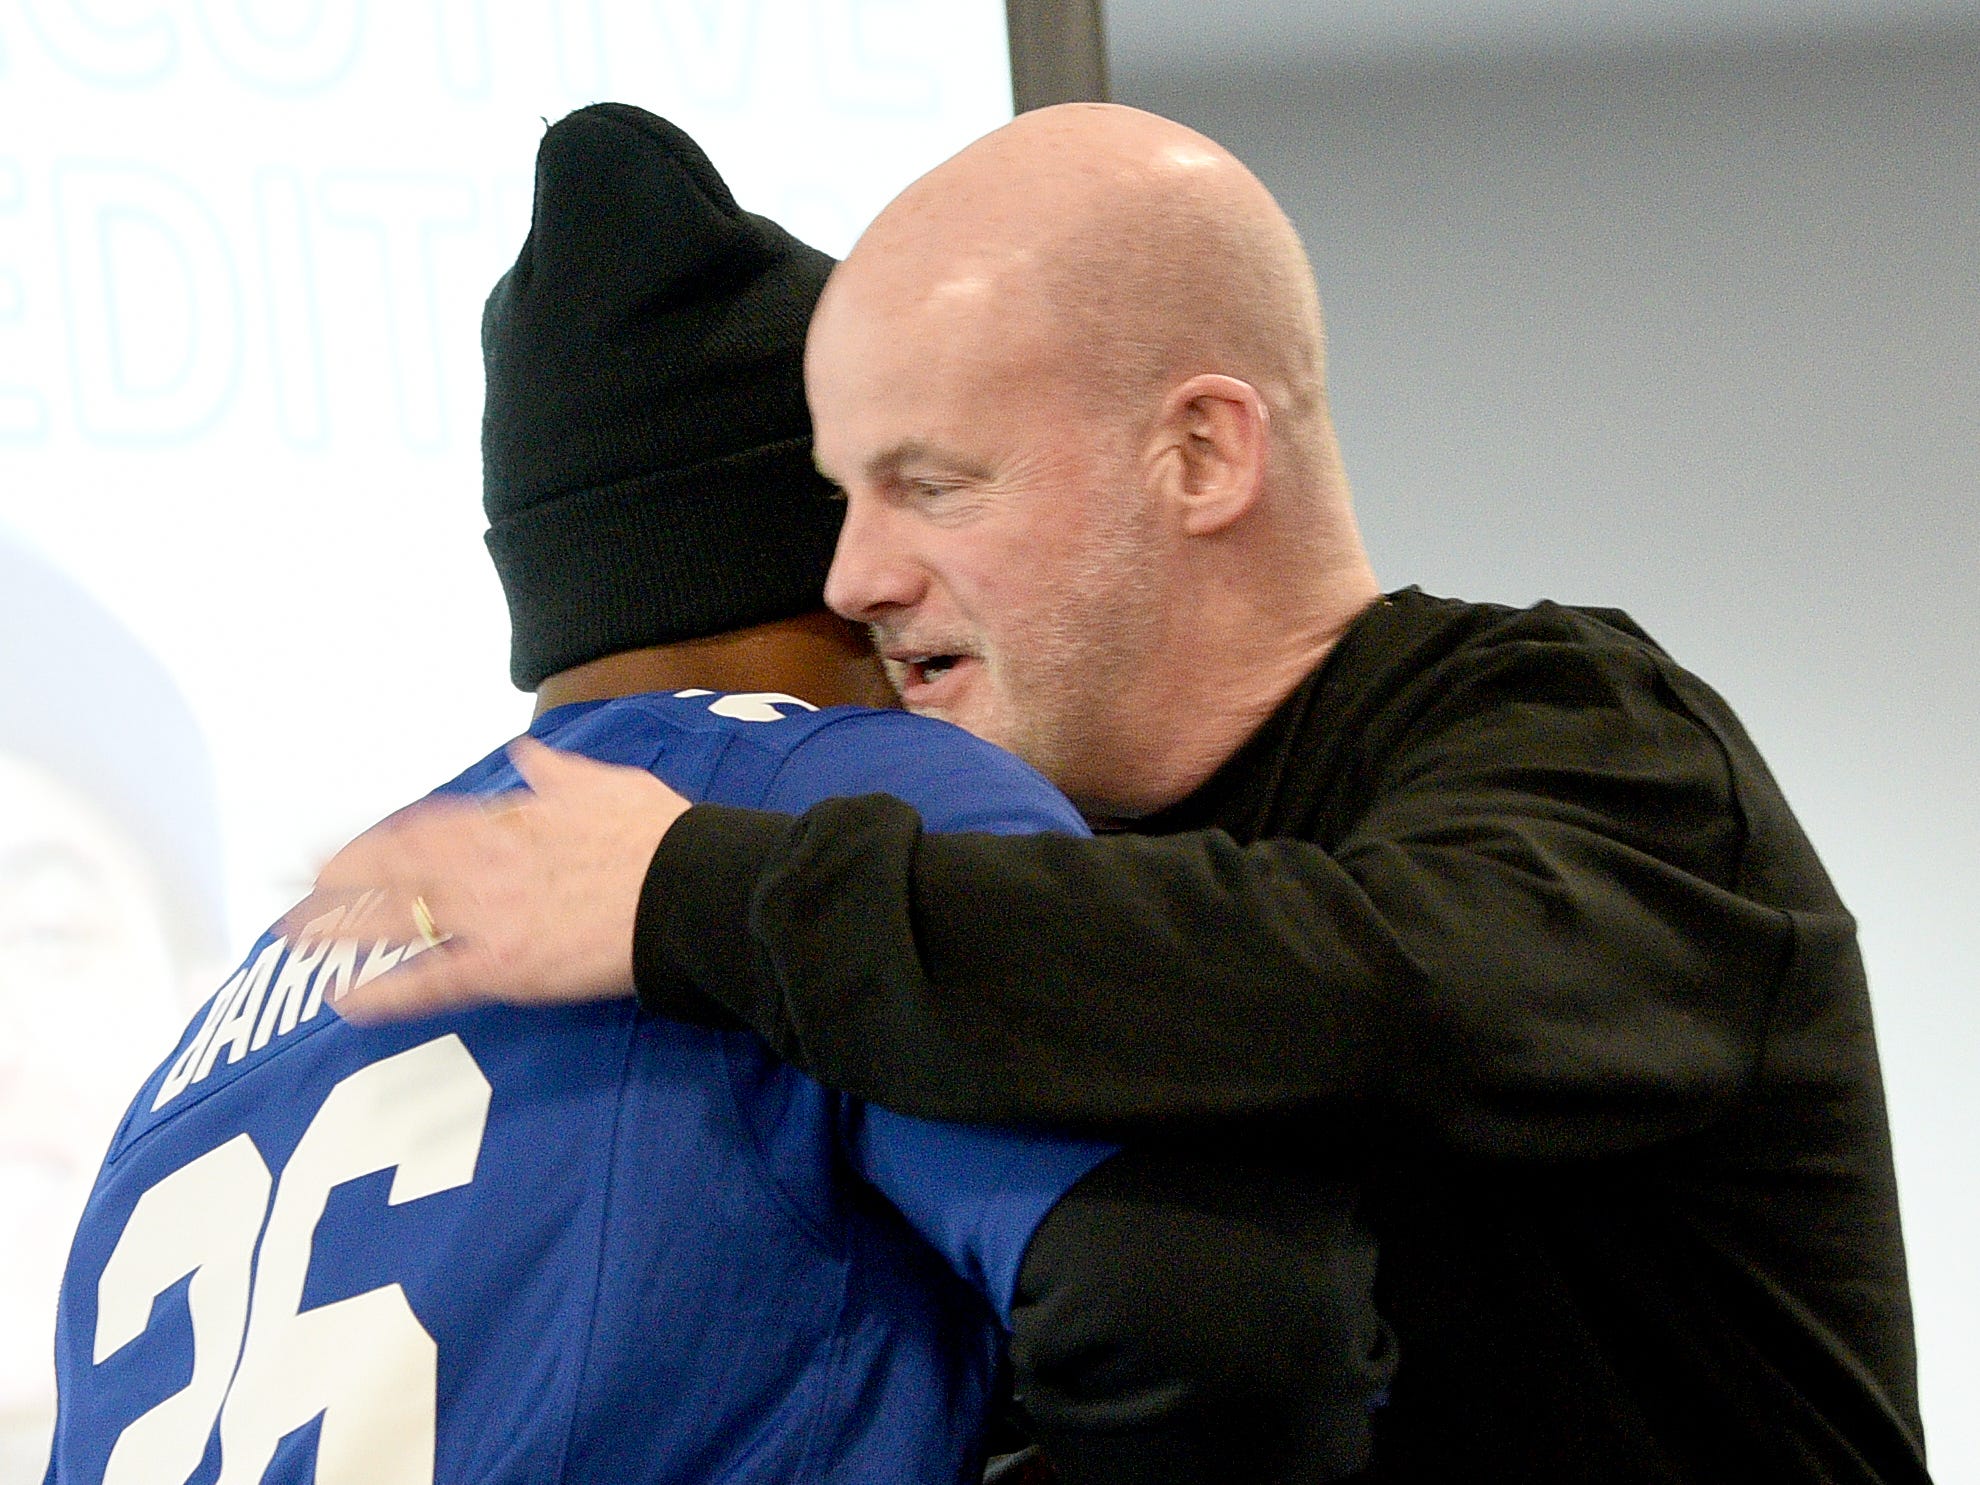 Covenant House holds a Sleep Out Executive Edition in Newark on Thursday November 21, 2019. Saquon Barkley a player with the Giants and Sleep Out: Executive Edition Chairman hugs the top fundraiser Jim O'Brien.